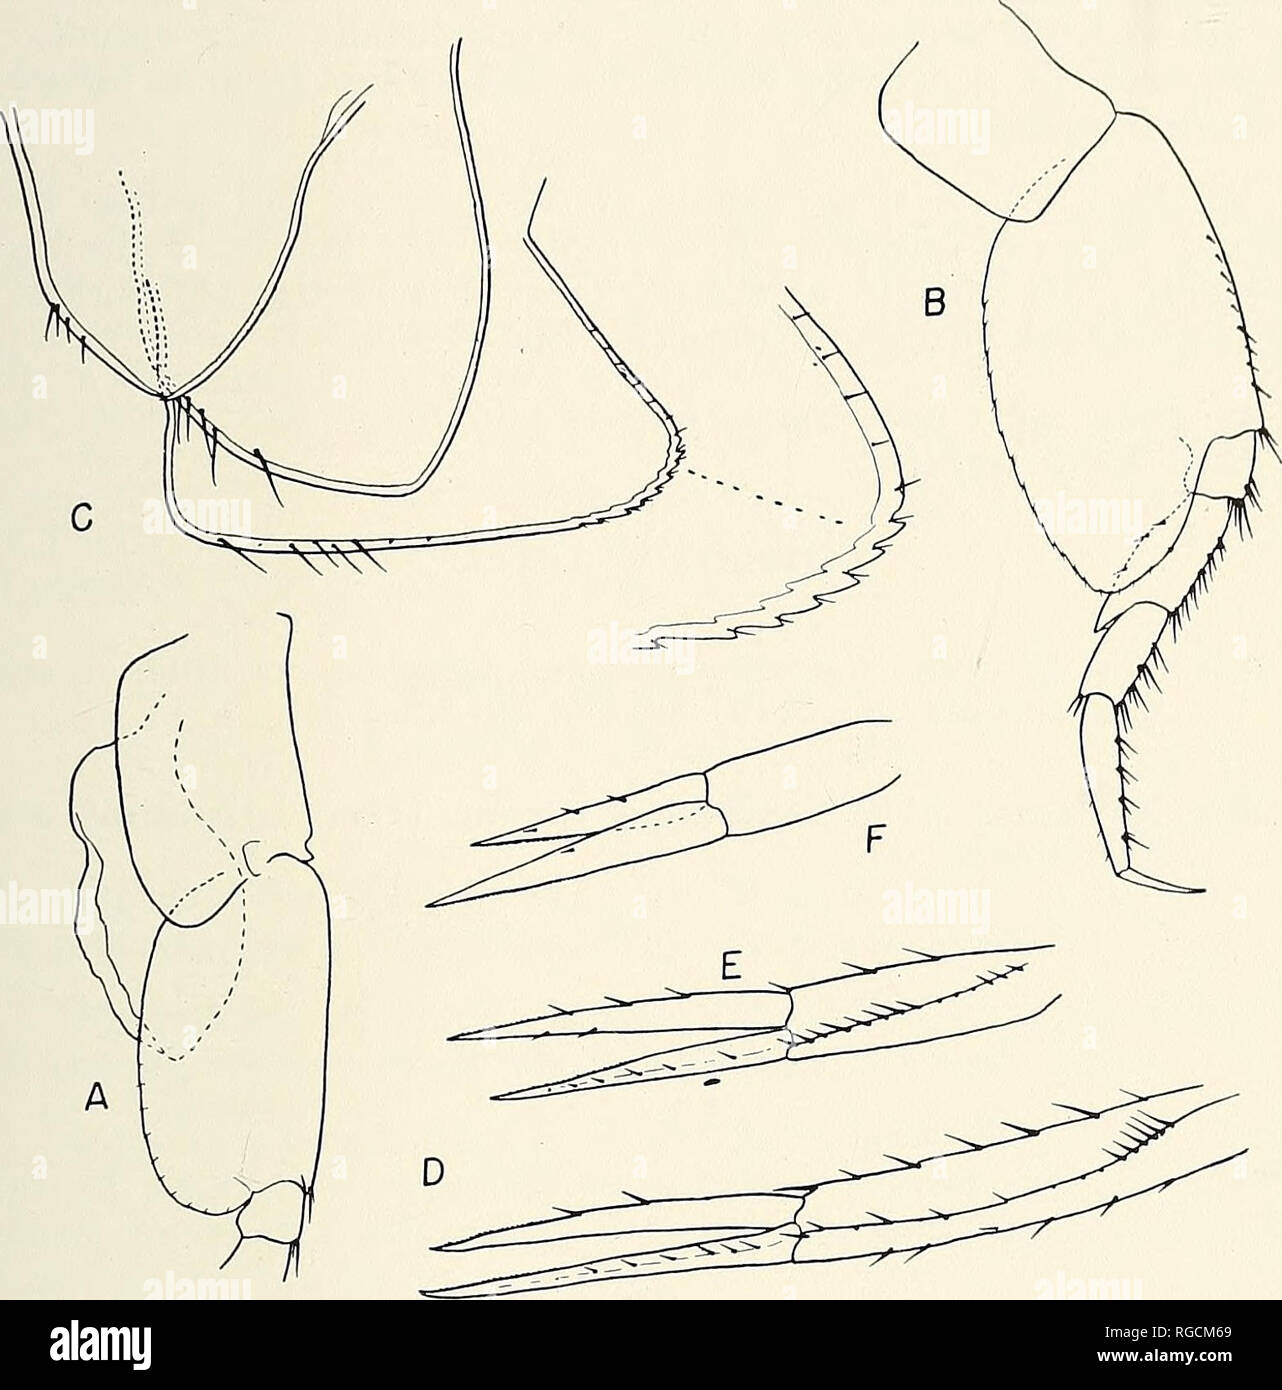 . Bulletin of the Southern California Academy of Sciences. Science; Natural history; Natural history. BxiLLETiN, So. Calif. Academy of Sciences Vol. 55, Part 1, 1956. PLATE 11 Stegocephalus hancocki, n. sp. A.—Peraeopod 4, anterior segments. B.—Peraeopod 5. C—Epimeral plates with enlargement of distal angle of 3rd. D.—Uropod 1. E.—Uropod 2. F.-Uropod 3. Remarks: Although close to Stegocephalus inflatus Kroyer, the following differences may be noted. The third epimeral plate in S. infiatus is ventrally serrate with the posterodistal angle sharp and even slightly produced posteriorly; here it is Stock Photo